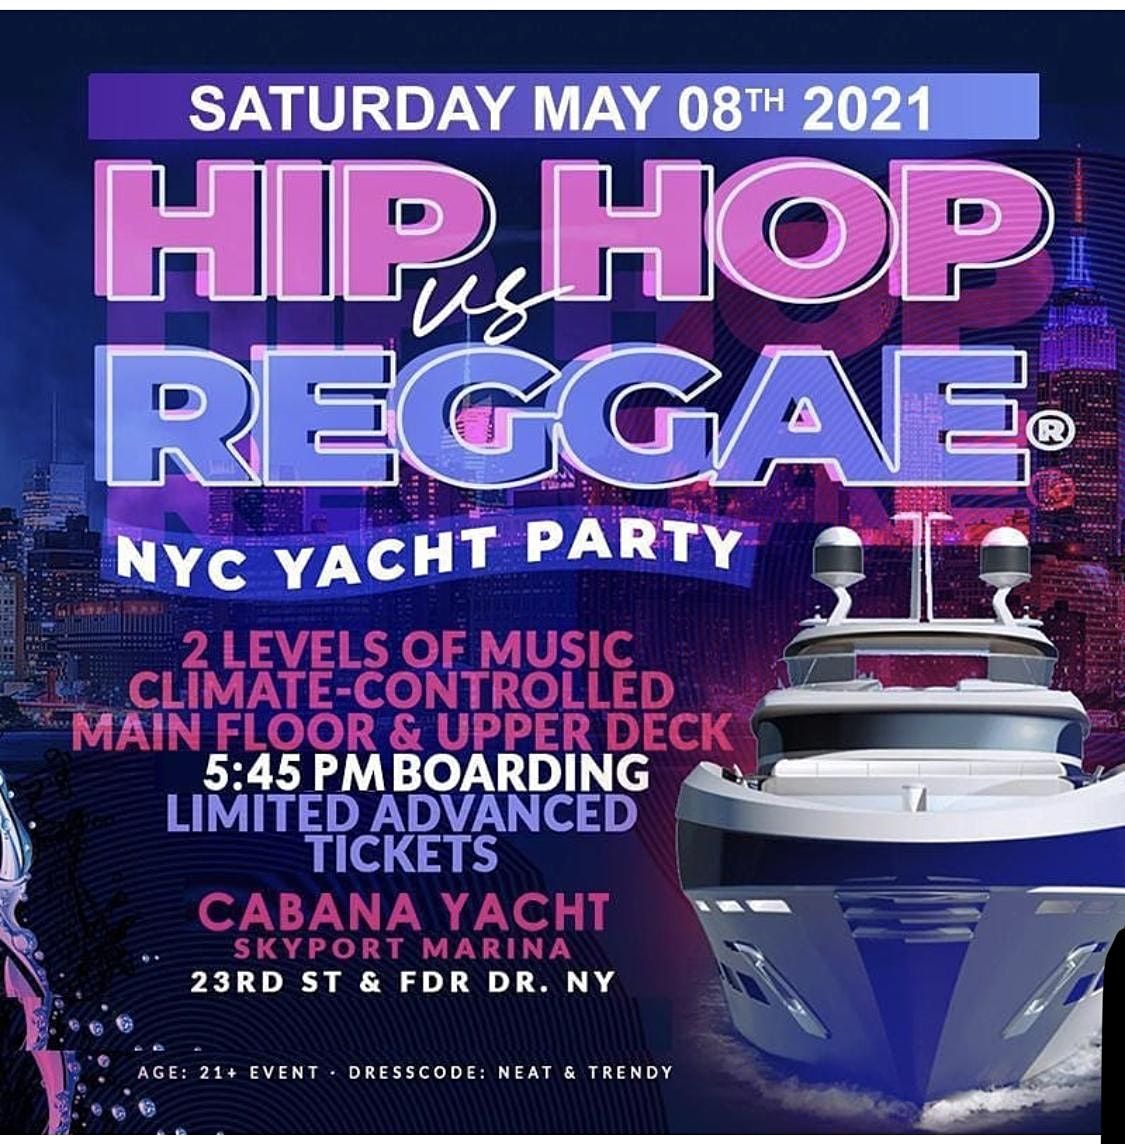 MIDNIGHT YACHT PARTY NYC! Sat., July 17th